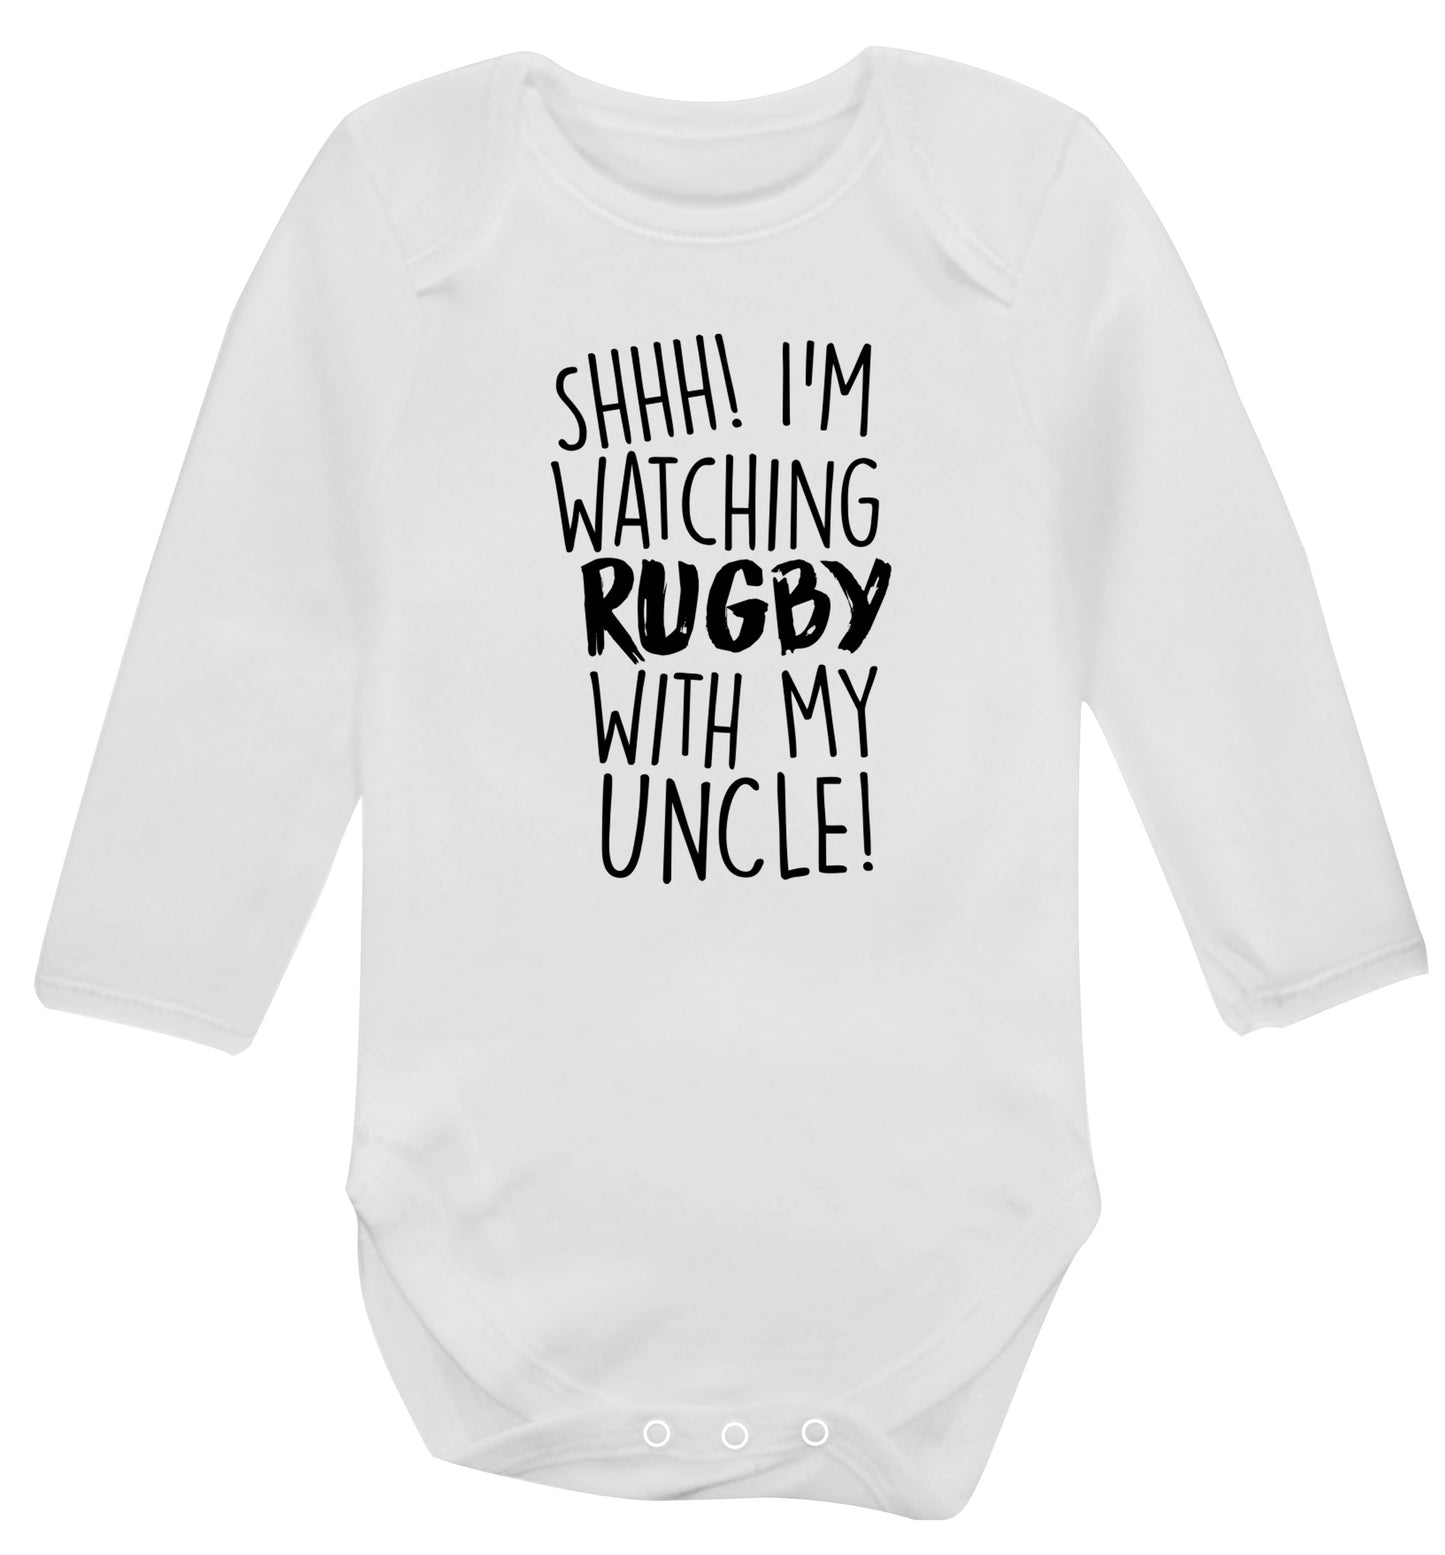 Shh.. I'm watching rugby with my uncle Baby Vest long sleeved white 6-12 months